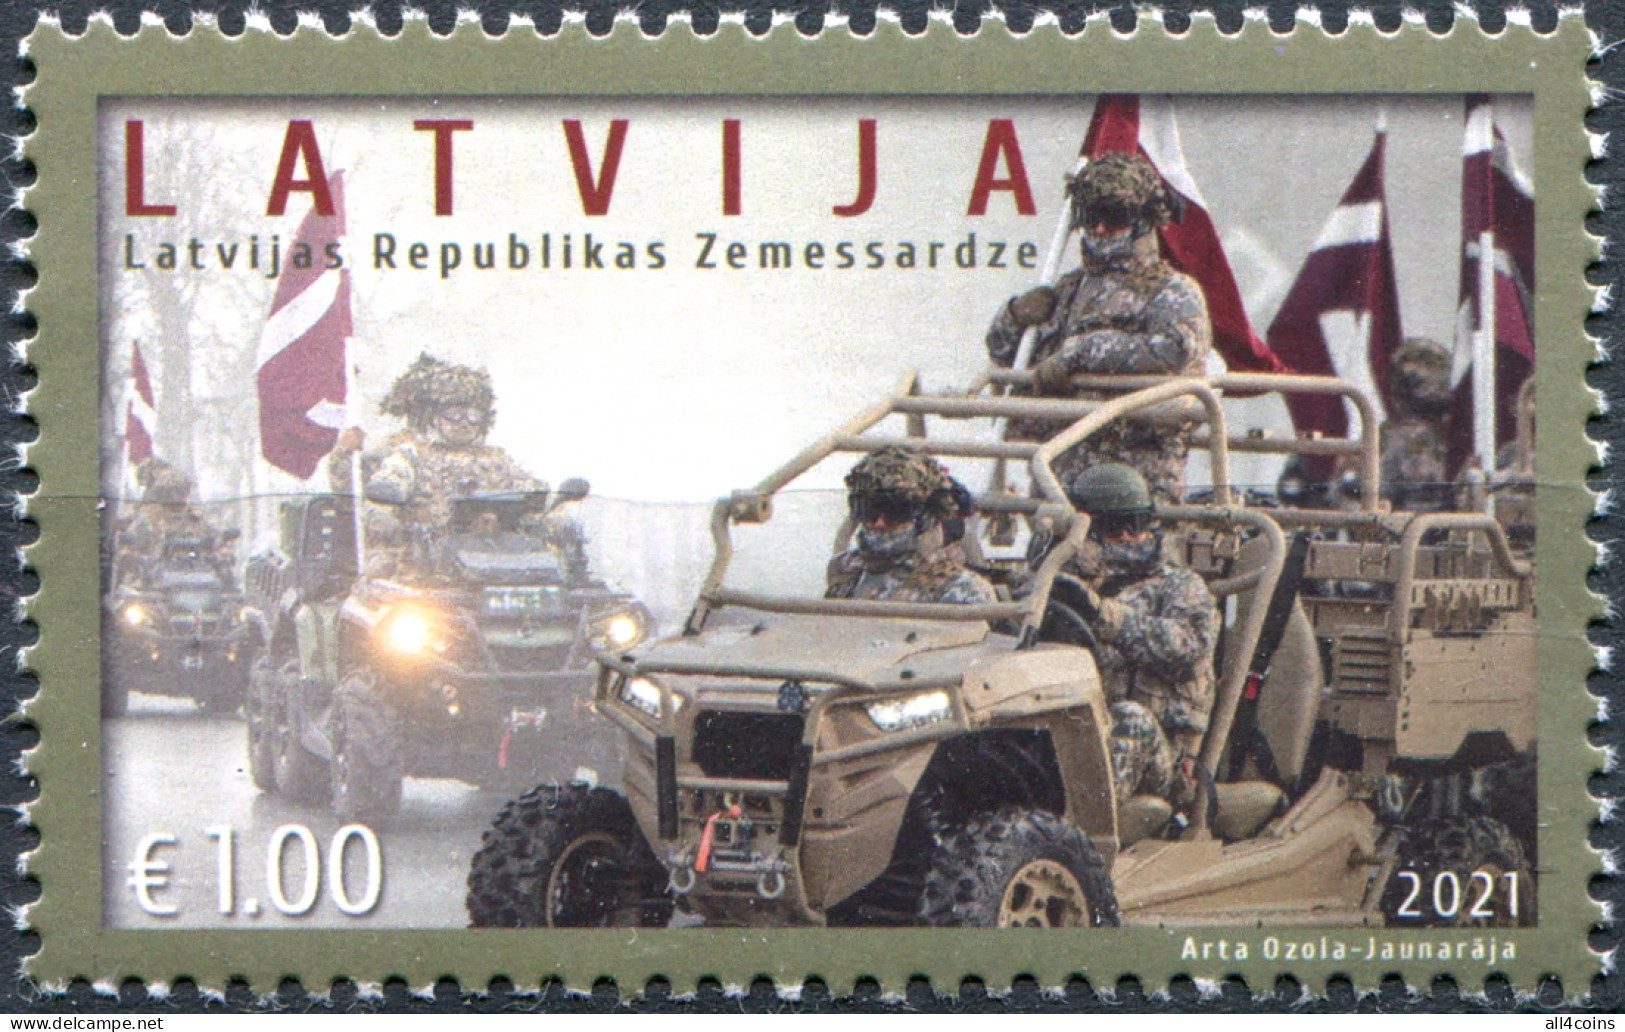 Latvia 2021. 30th Anniversary Of The Latvian National Guard (MNH OG) Stamp - Lettonie